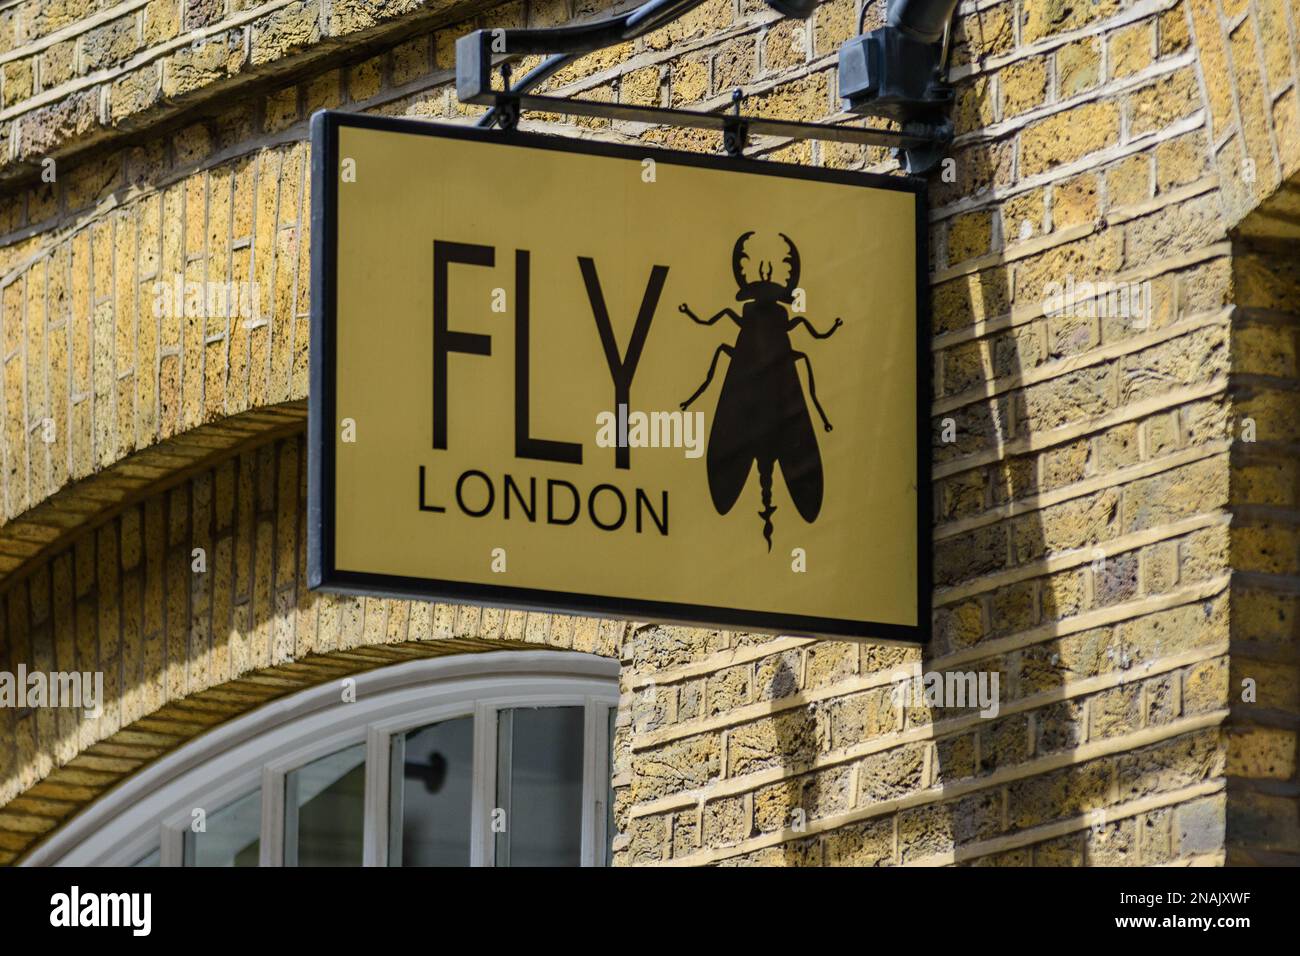 A shop sign outside a Fly London shoe shop in central London advertises their luxury brand to shoppers, tourists and passers by. Stock Photo